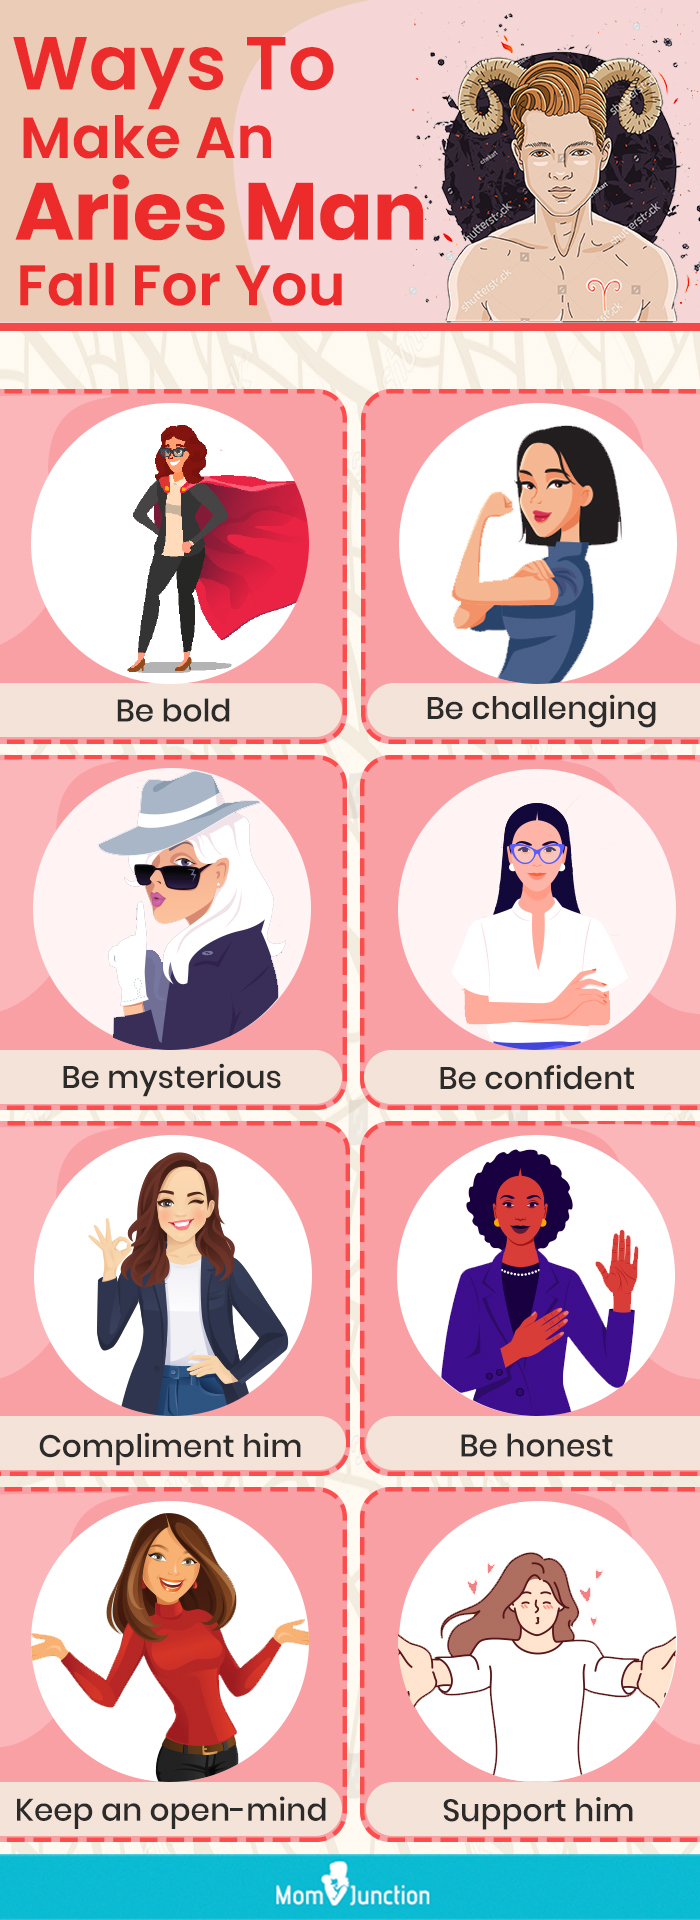 ways to attract an aries man [infographic]